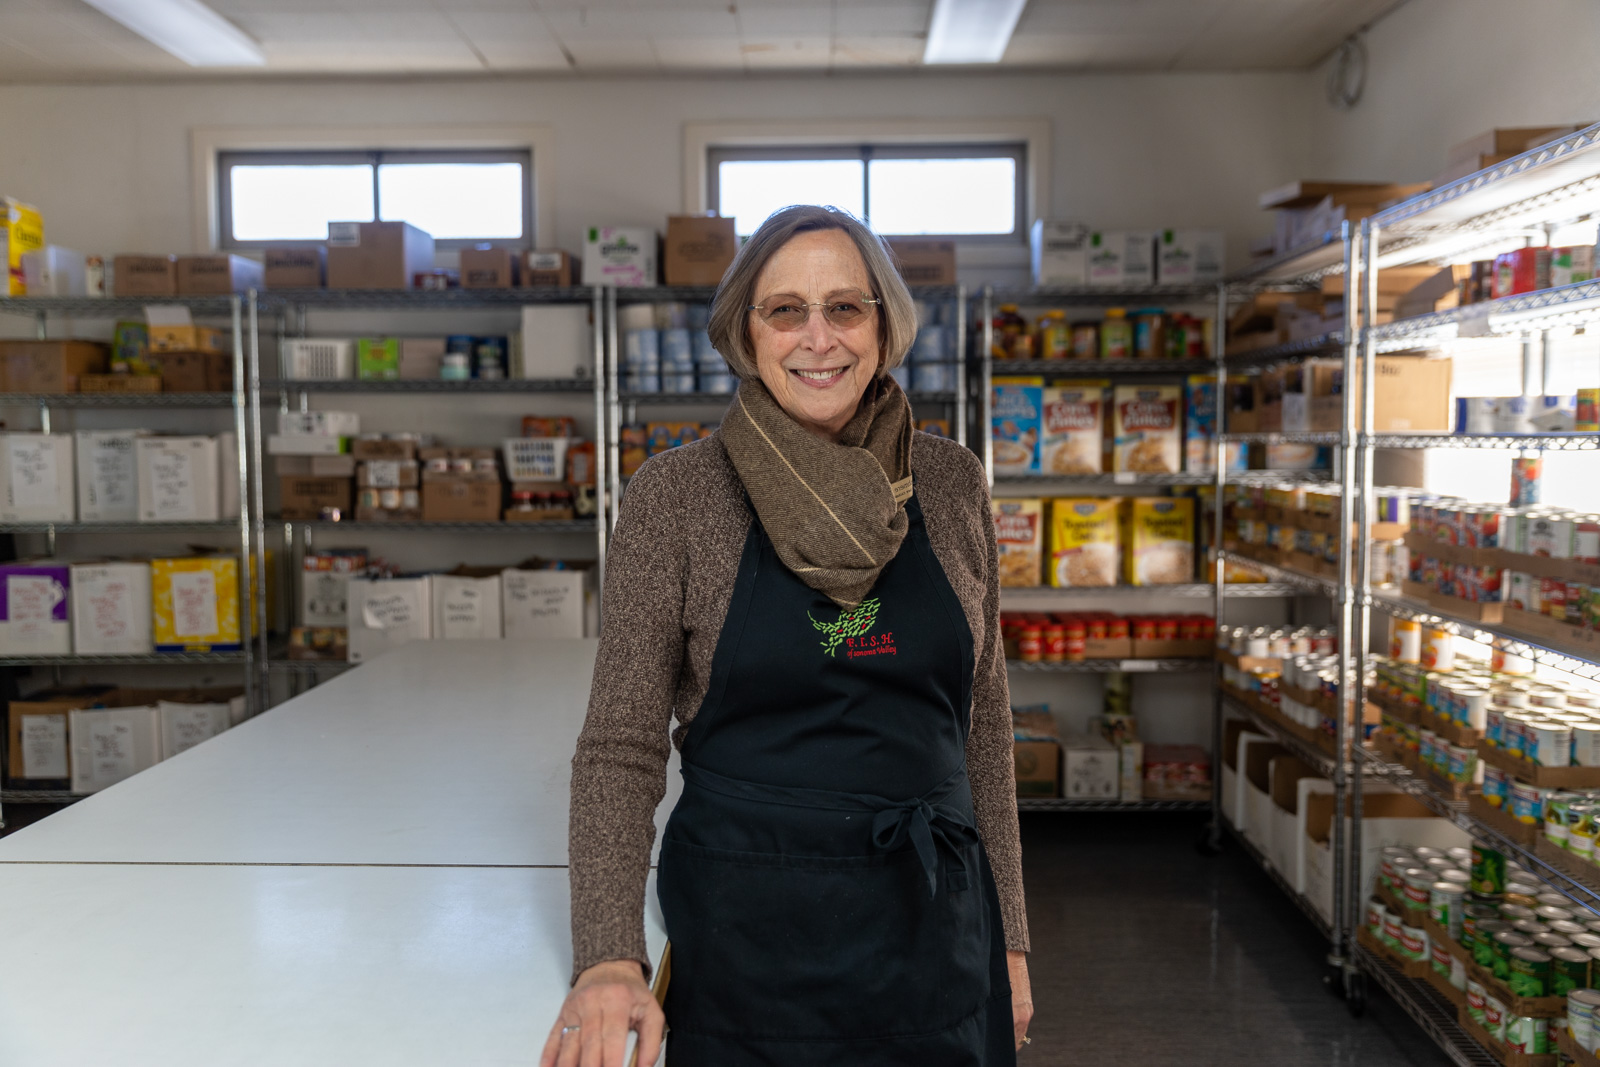 Sandy Piotter, Executive Director for FISH Sonoma stands in the food pantry